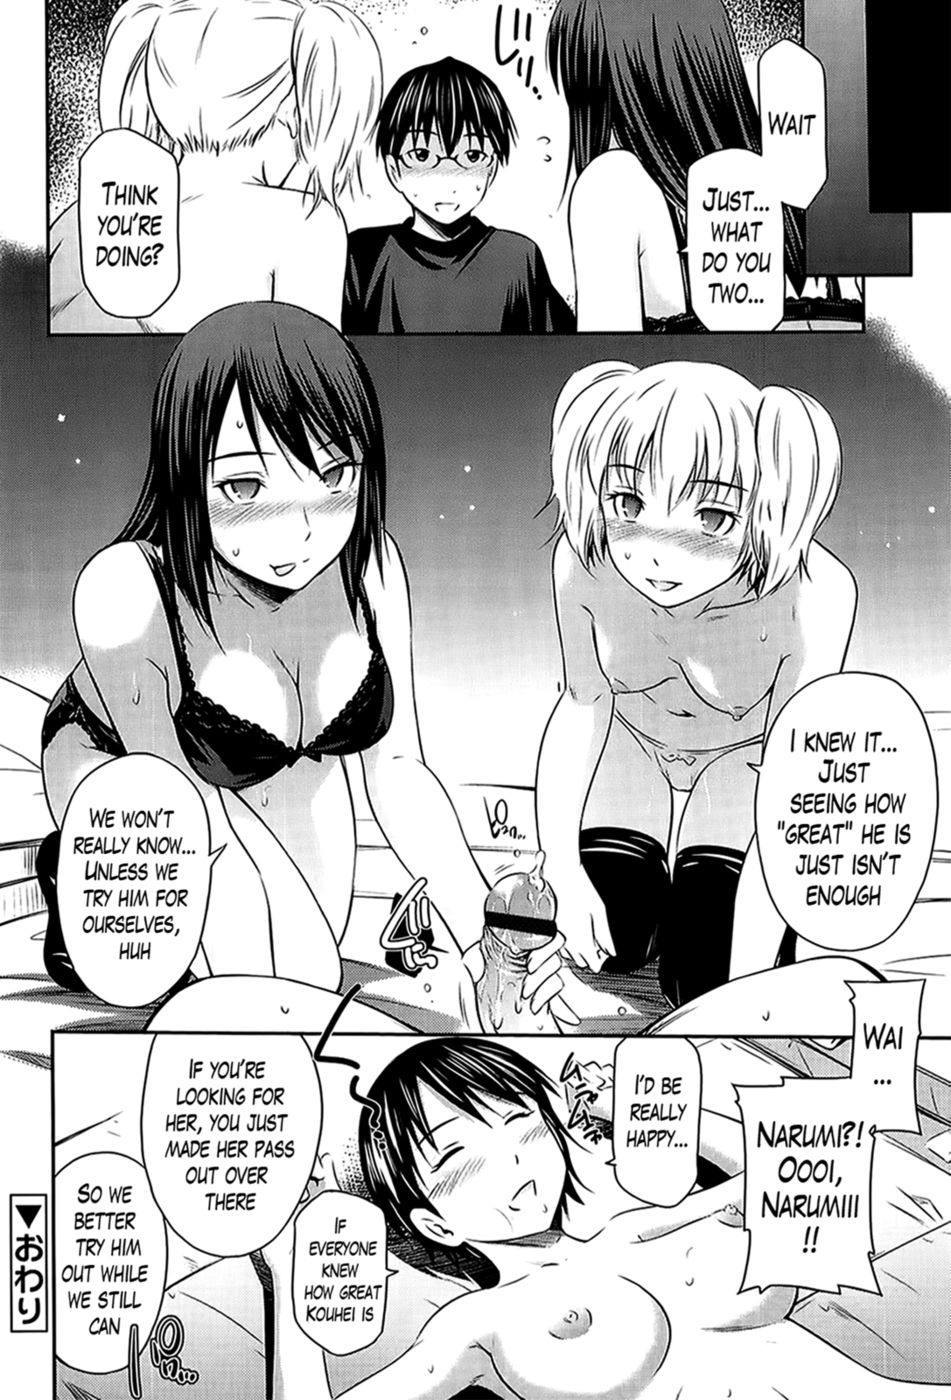 Hentai Manga Comic-A Very Hot Middle-Chapter 1-Narumi's Bragging About Her Boyfriend-30